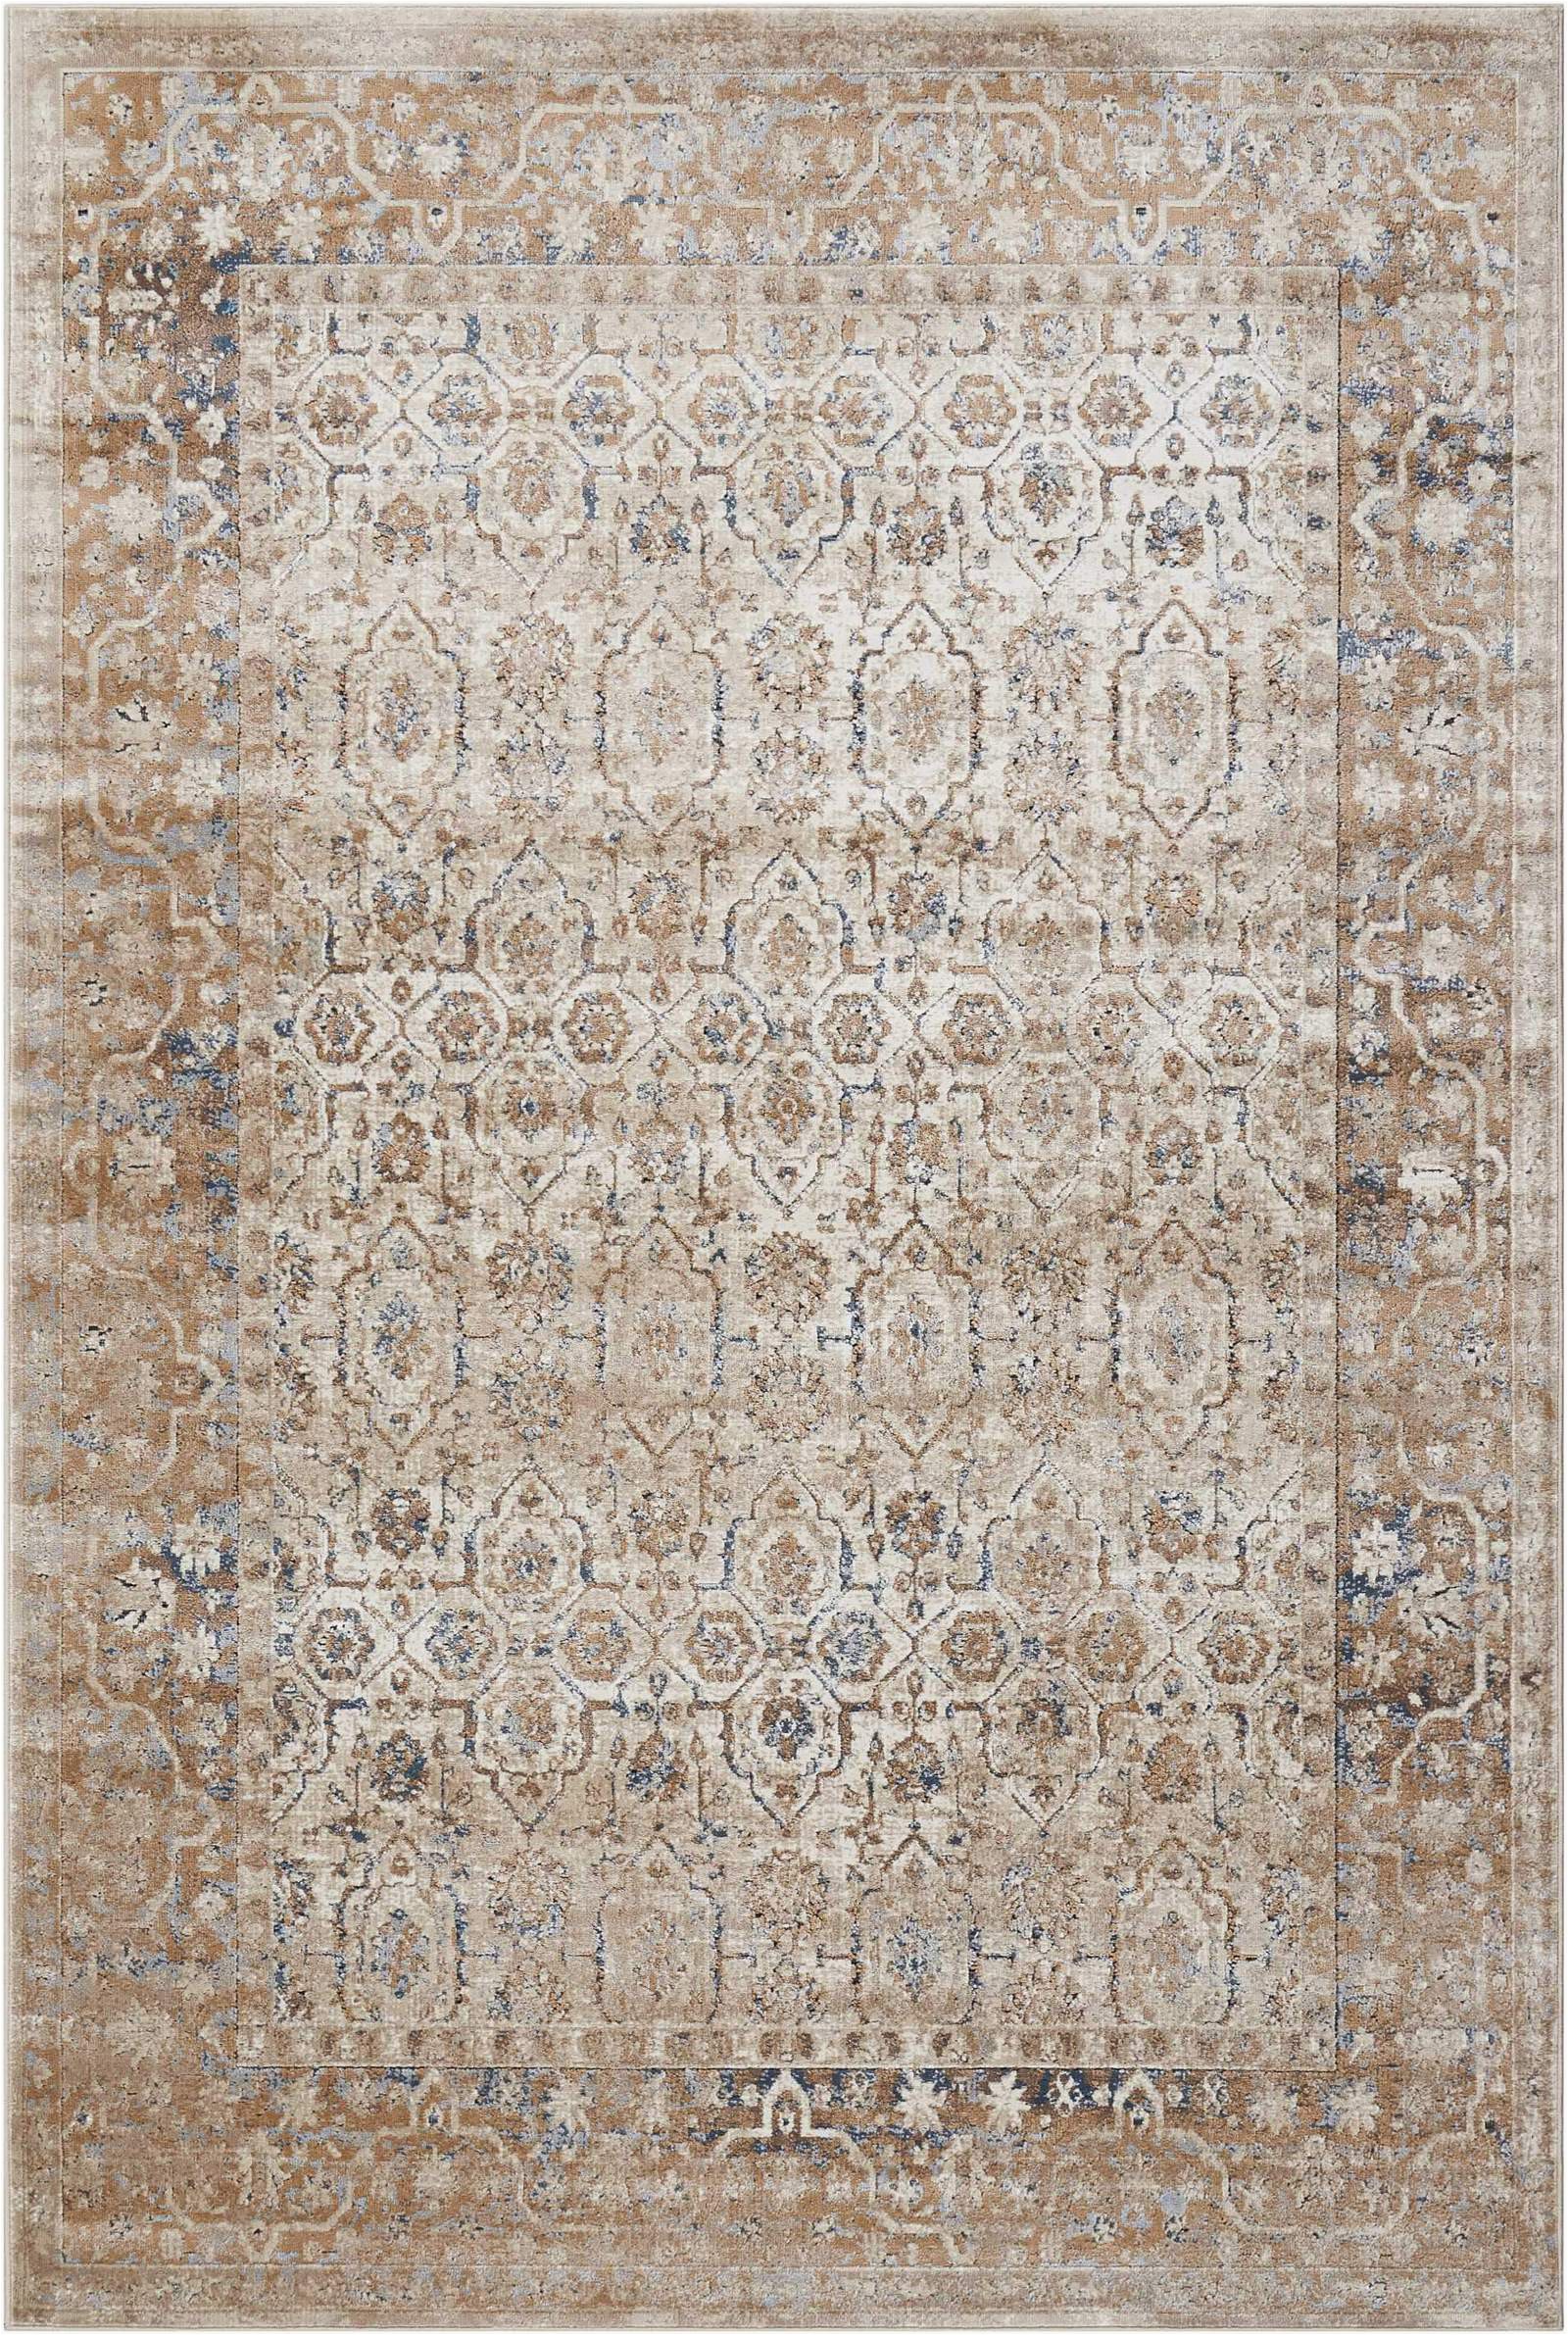 Cheap 12 by 12 area Rugs 9 X 12 Size 53 X 77